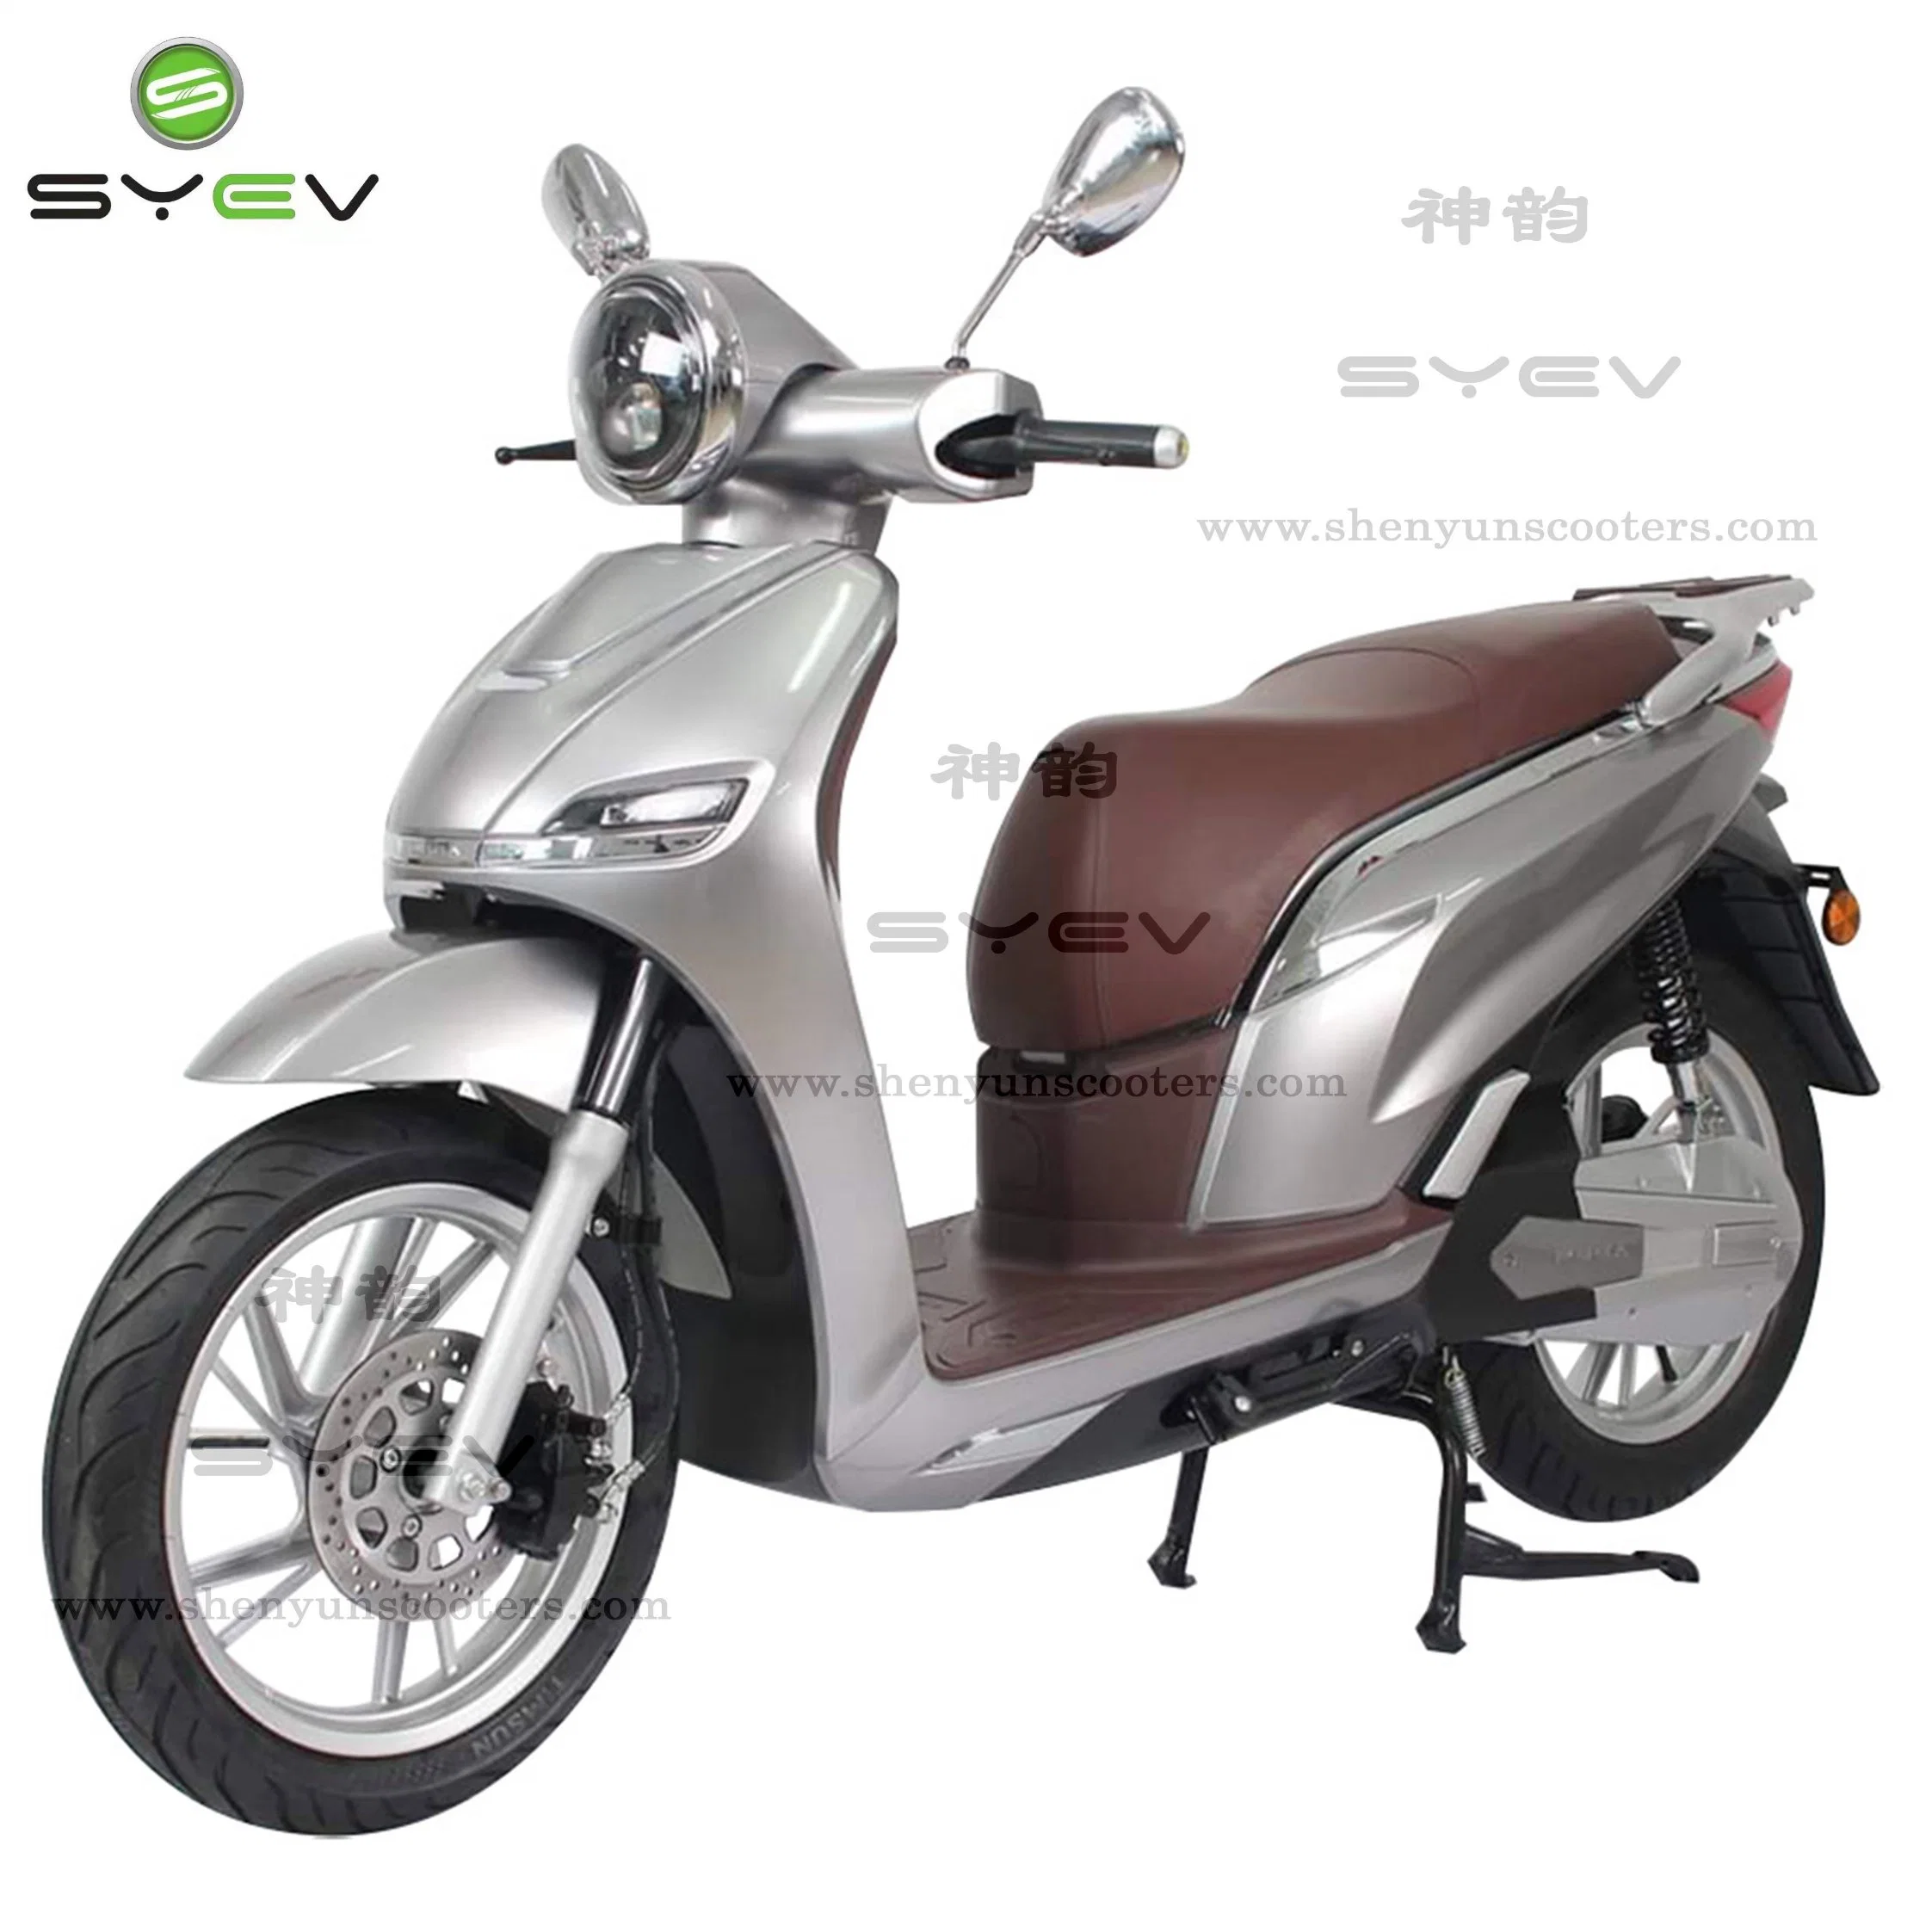 EEC Sy-T500 72V 3000W Lithium Battery 2 Two Wheel 80km/H High Speed off Road Racing Powerful Electric Motorcycle with Long Range Motor Mobility Scooter L3e